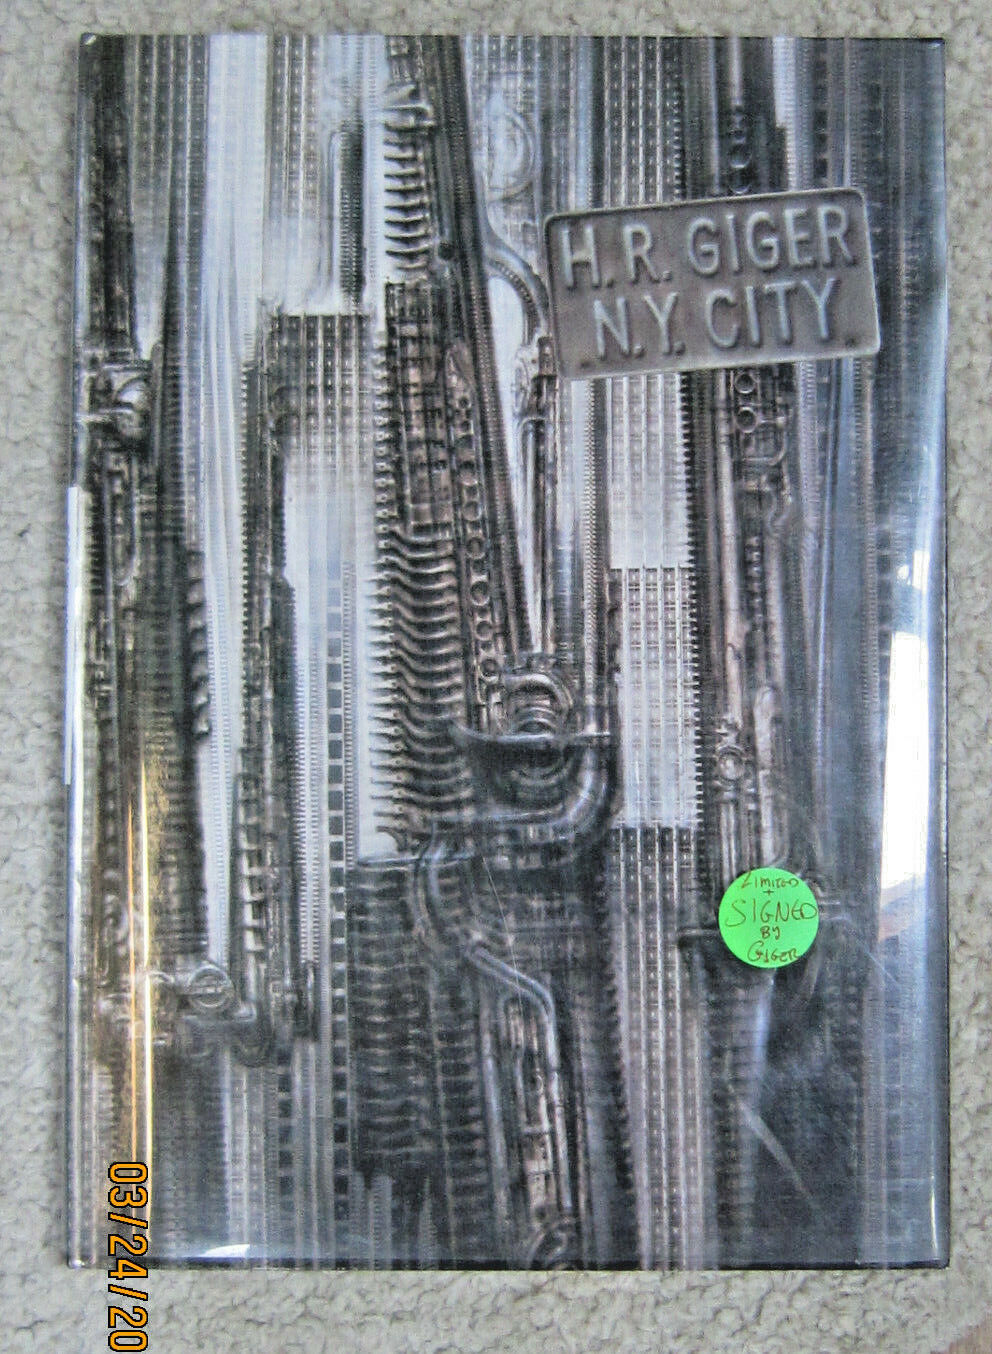 H.R. Giger N.Y. City Signed Limited Edition HC Book  Rare And Out Of Print New